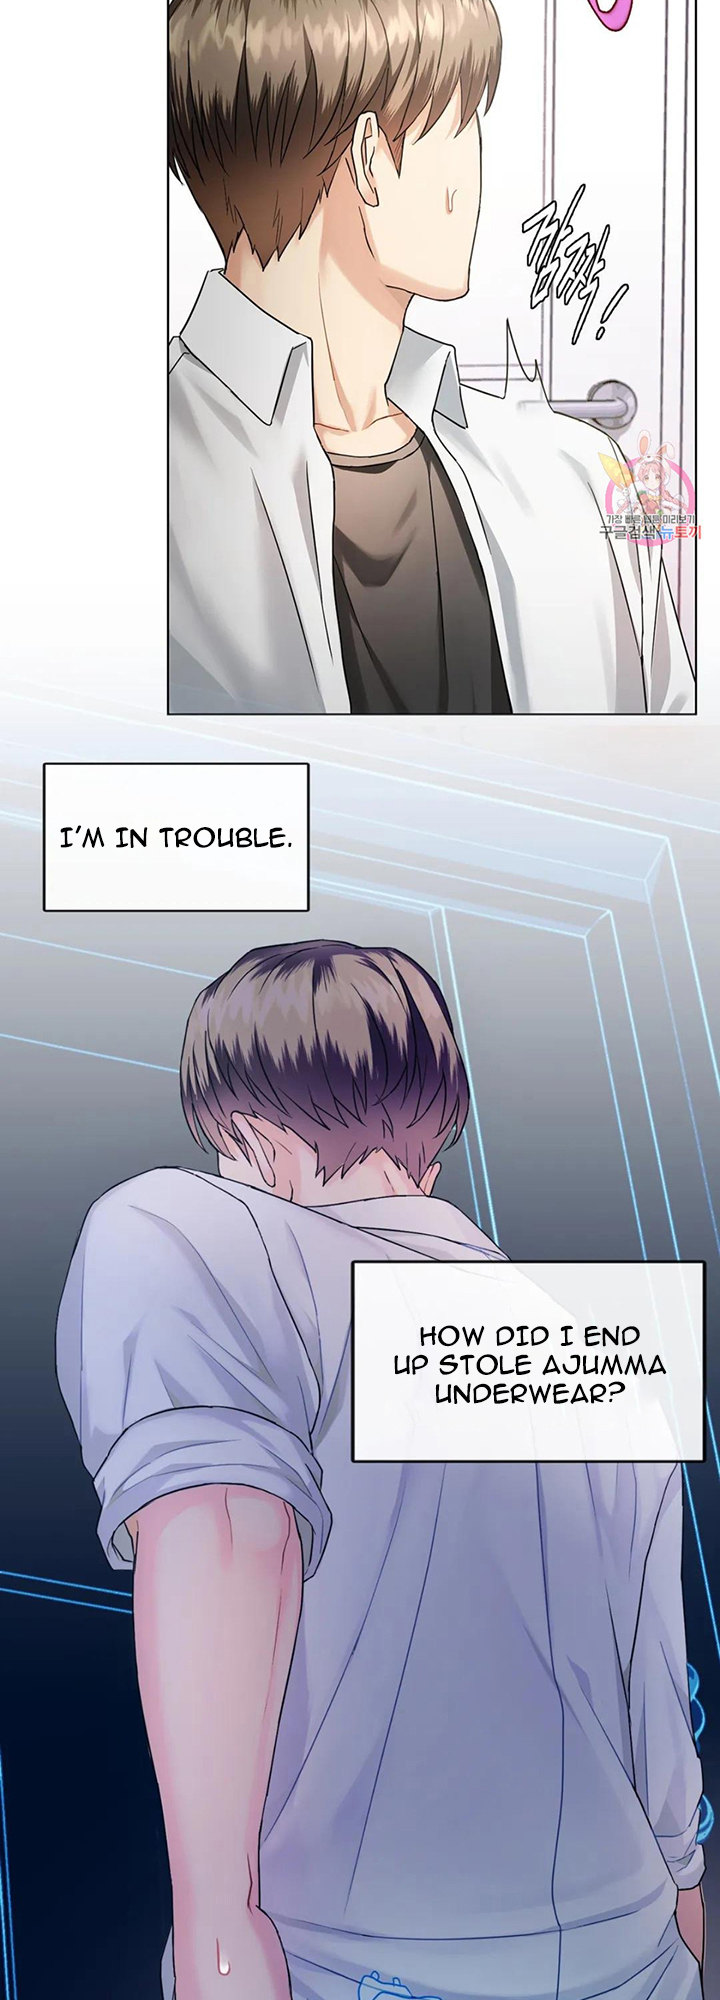 I Can’t Stand It, Ajumma - Chapter 2 Page 5